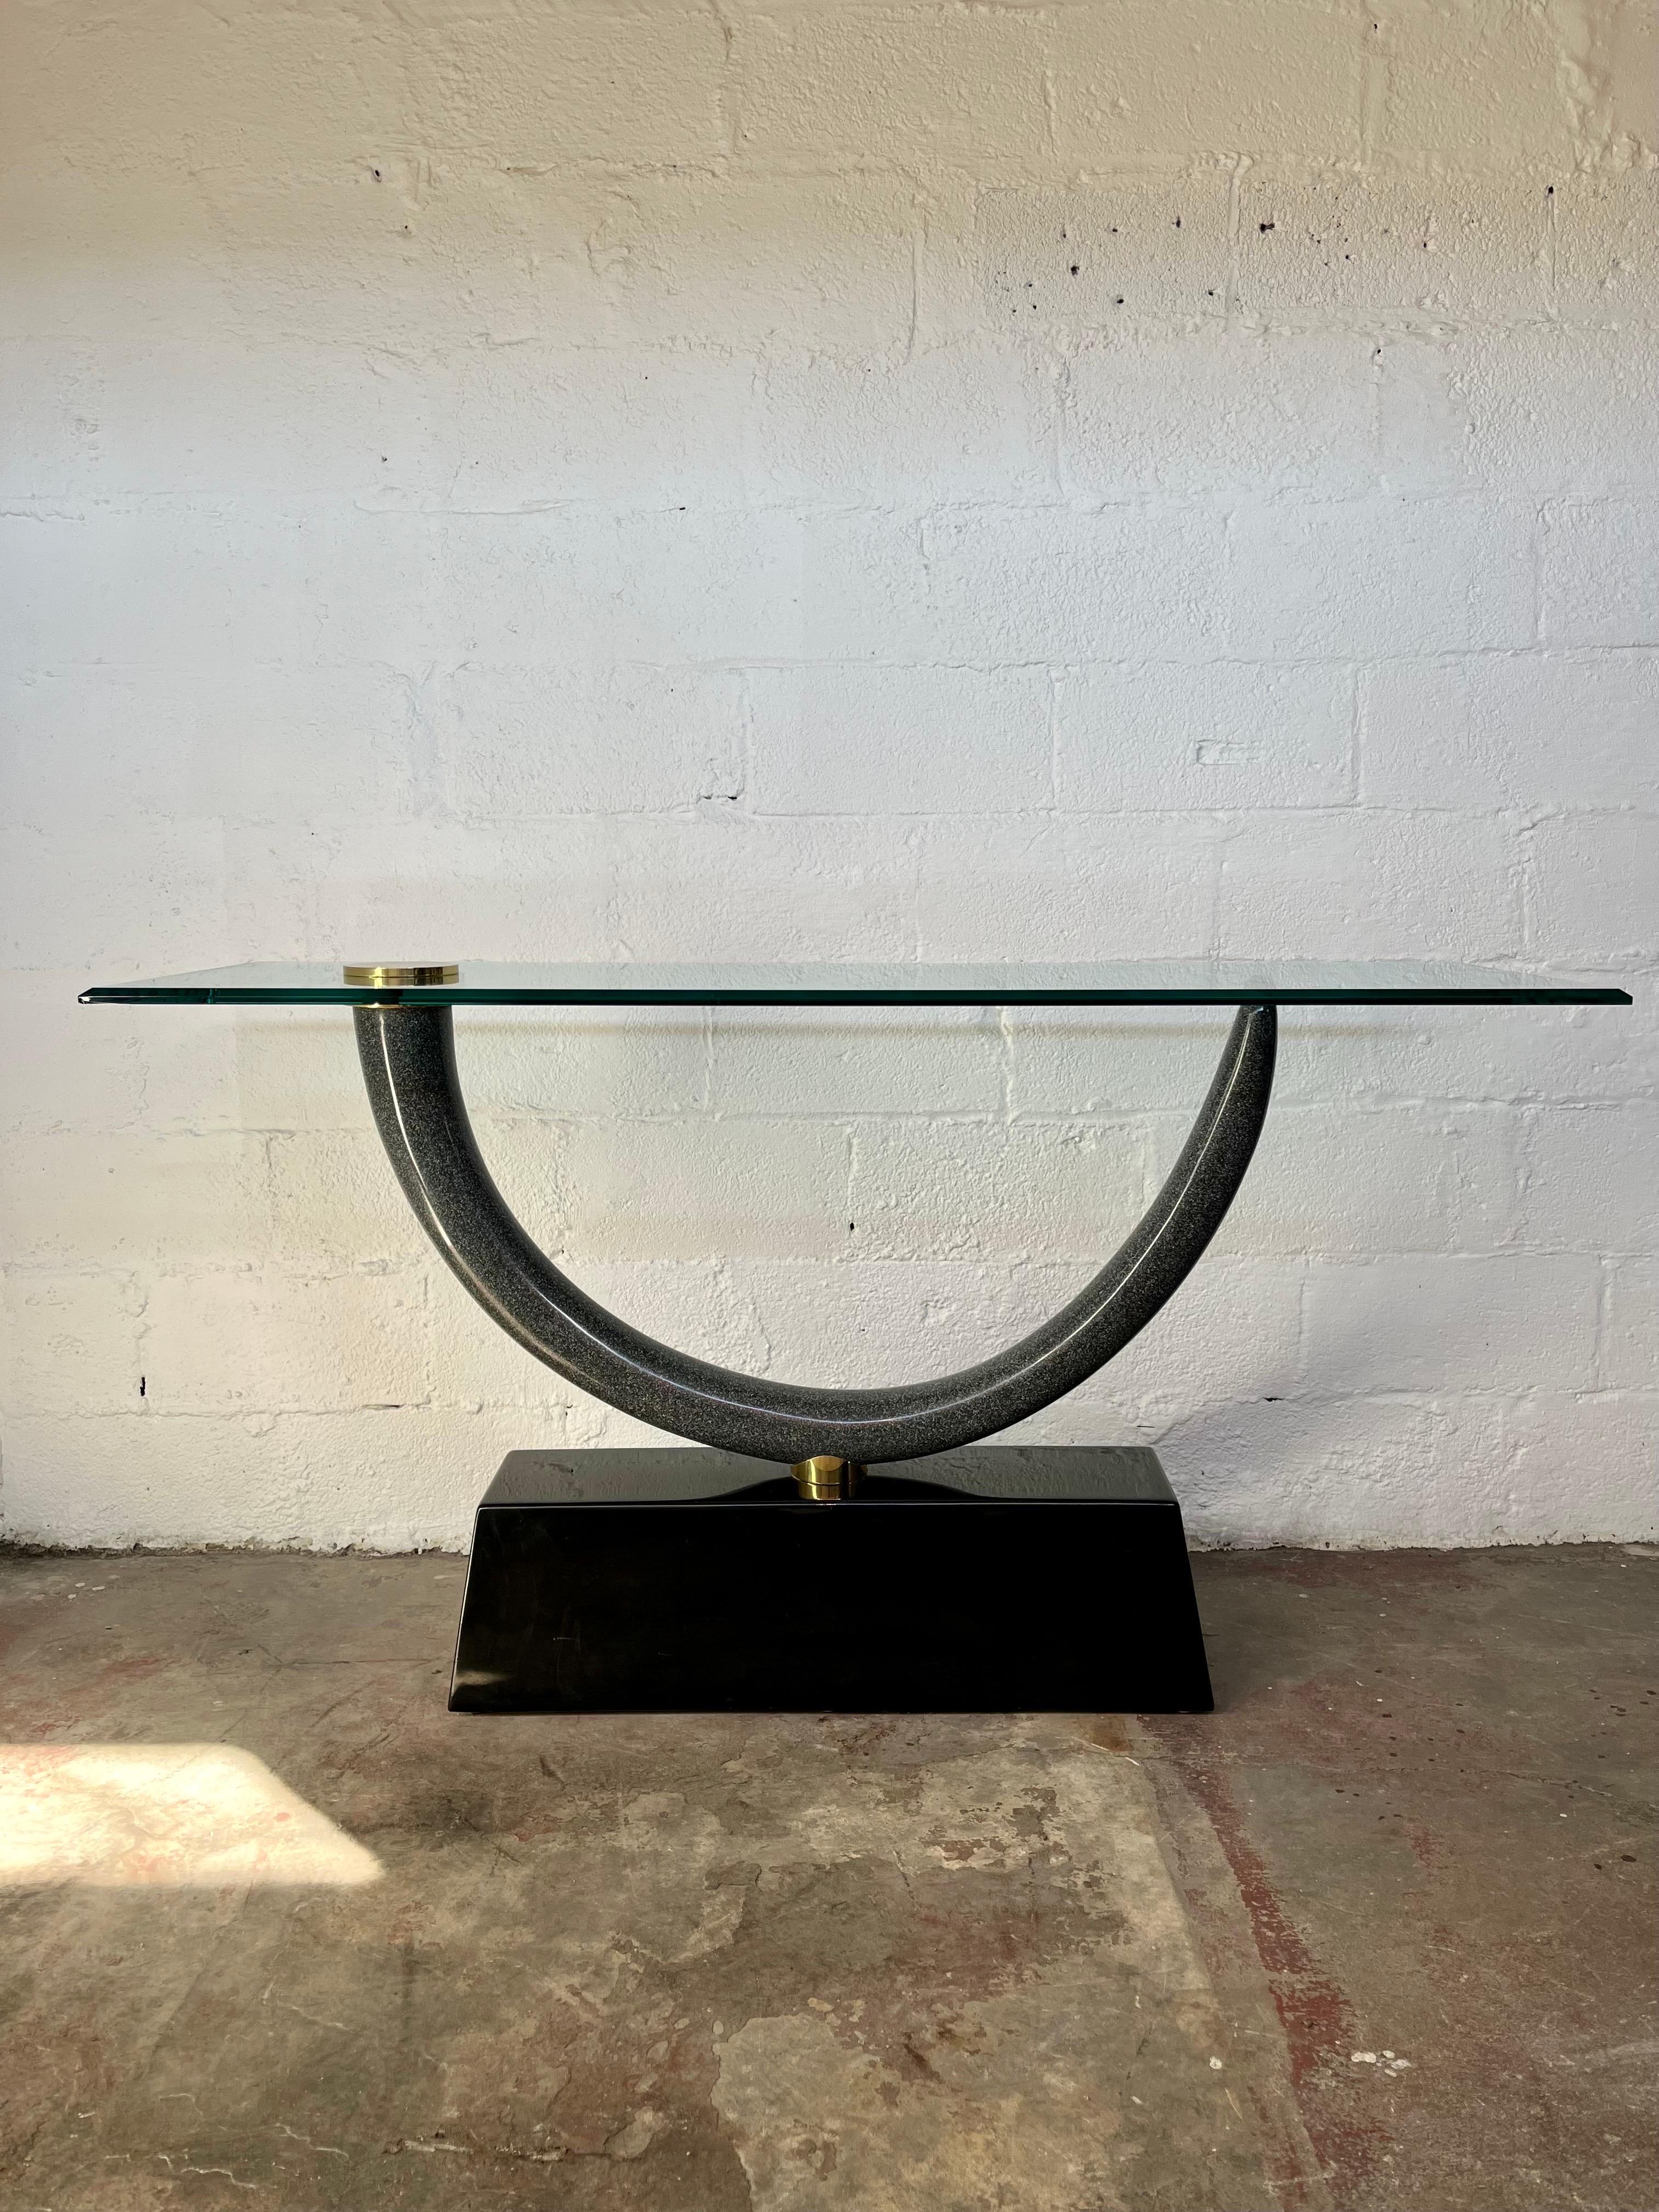 This is an iconic Maison Jansen Tusk form console table with a gorgeous resin tusk and glass top with a brass and a black ebonized base. The table is in very good condition but will show signs of use such as minor surface scratches on the top and